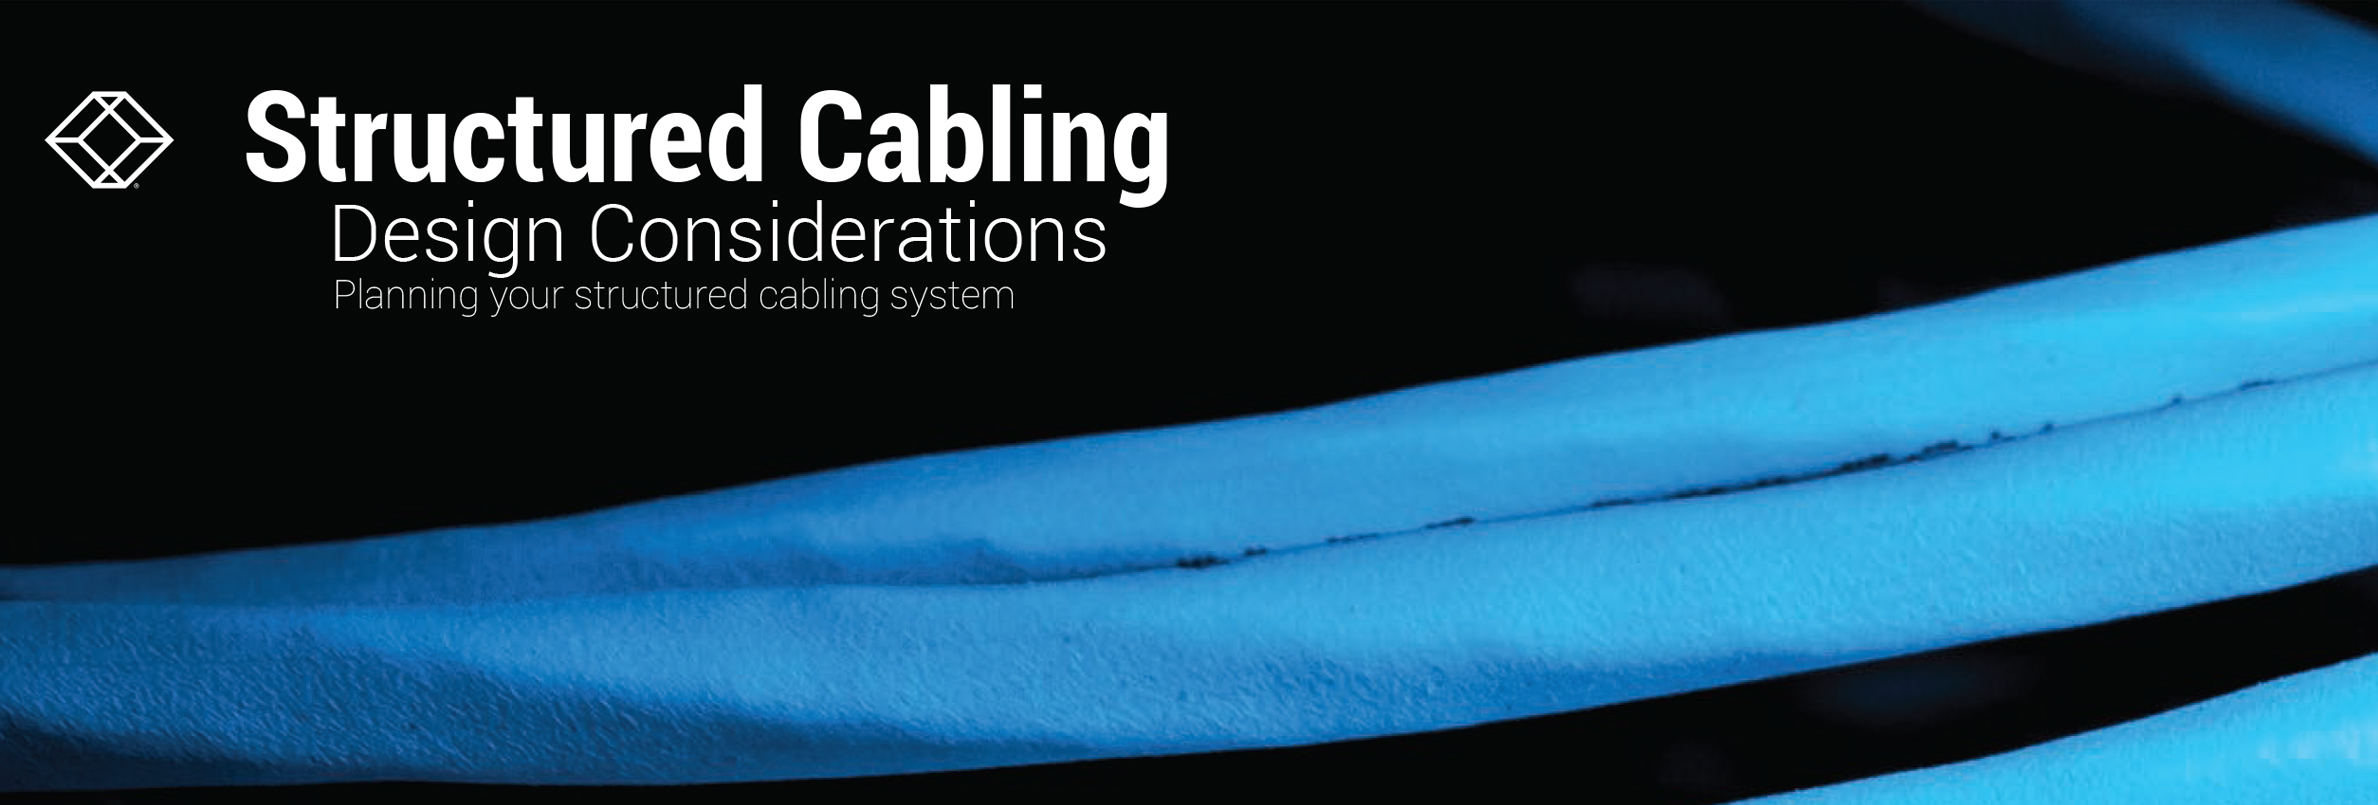 design-considerations-structured-cabling